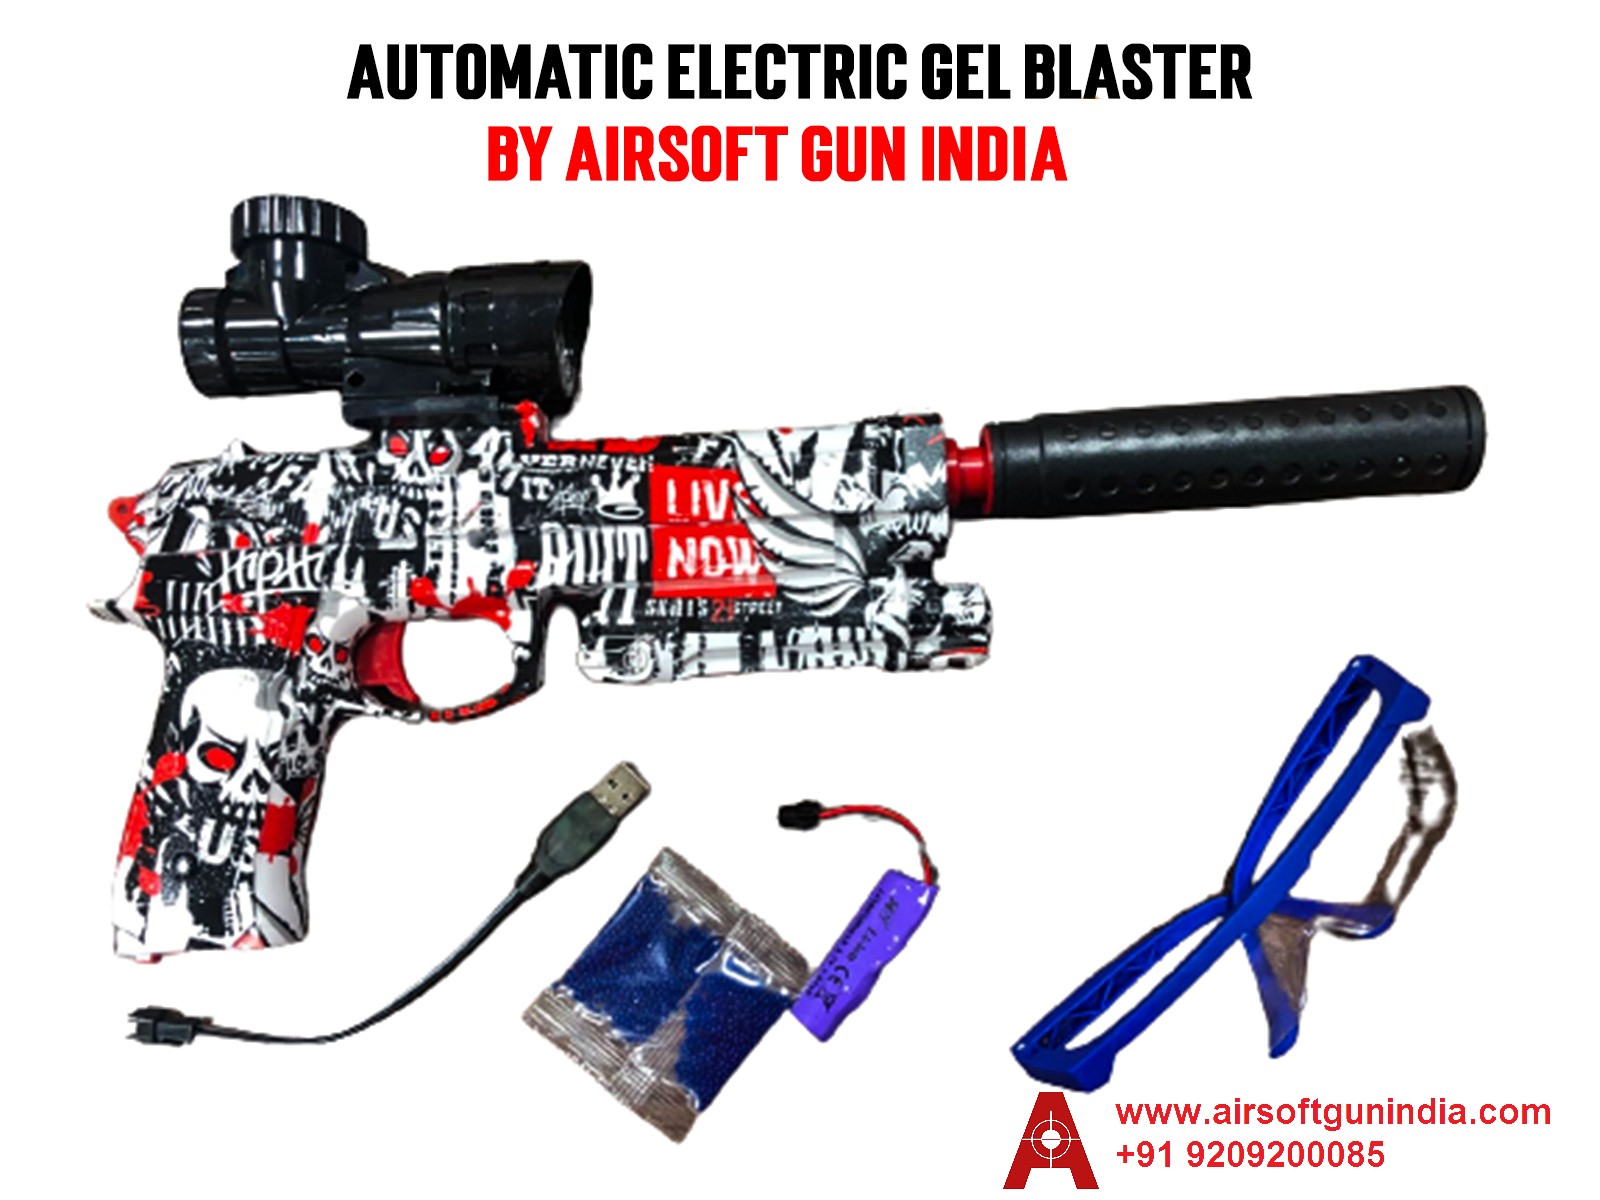 Beretta M9 Camo Style Automatic Electric Gel Blaster By Airsoft Gun India